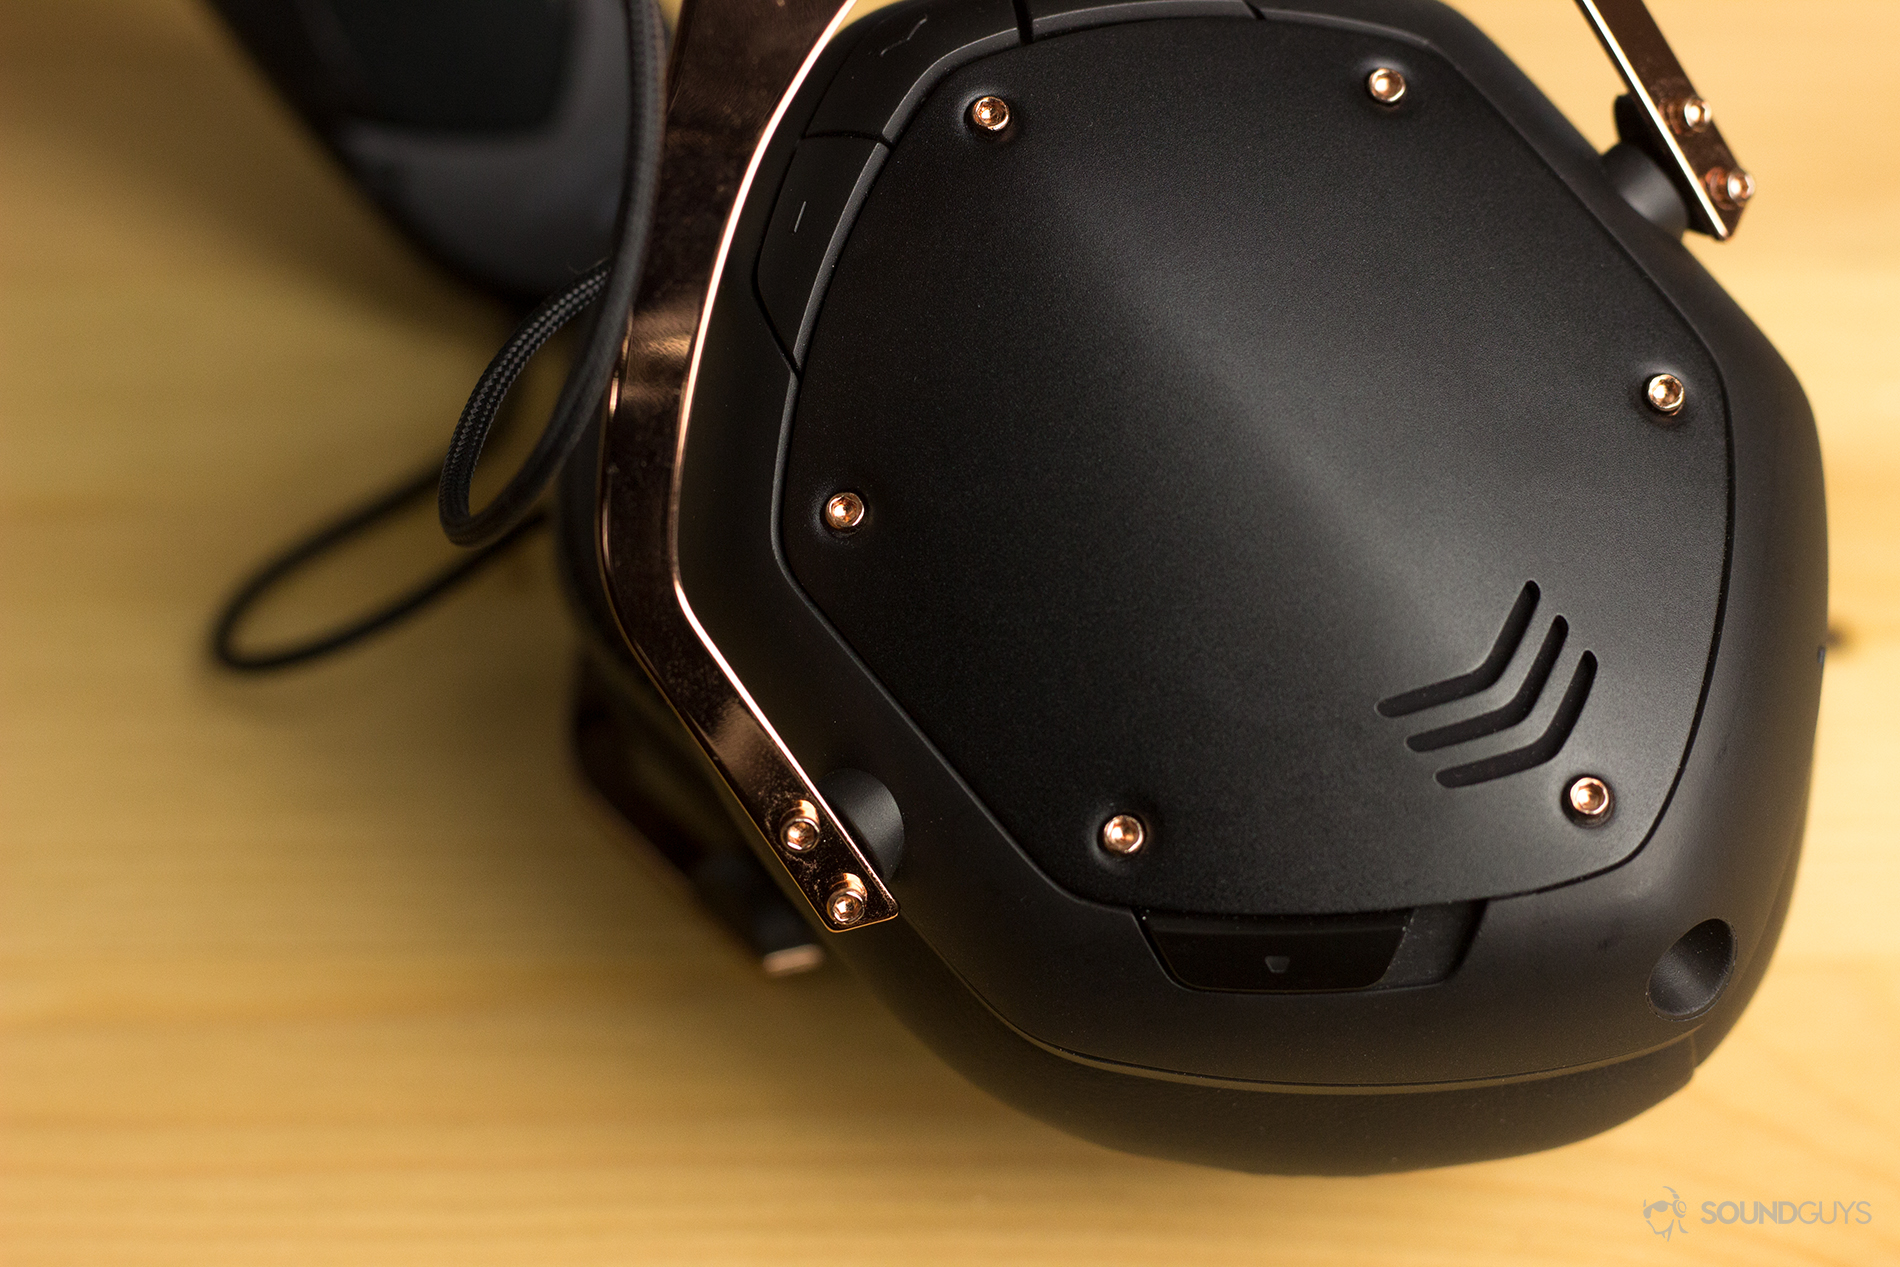 A close-up of the Crossfade 2 ear cup.